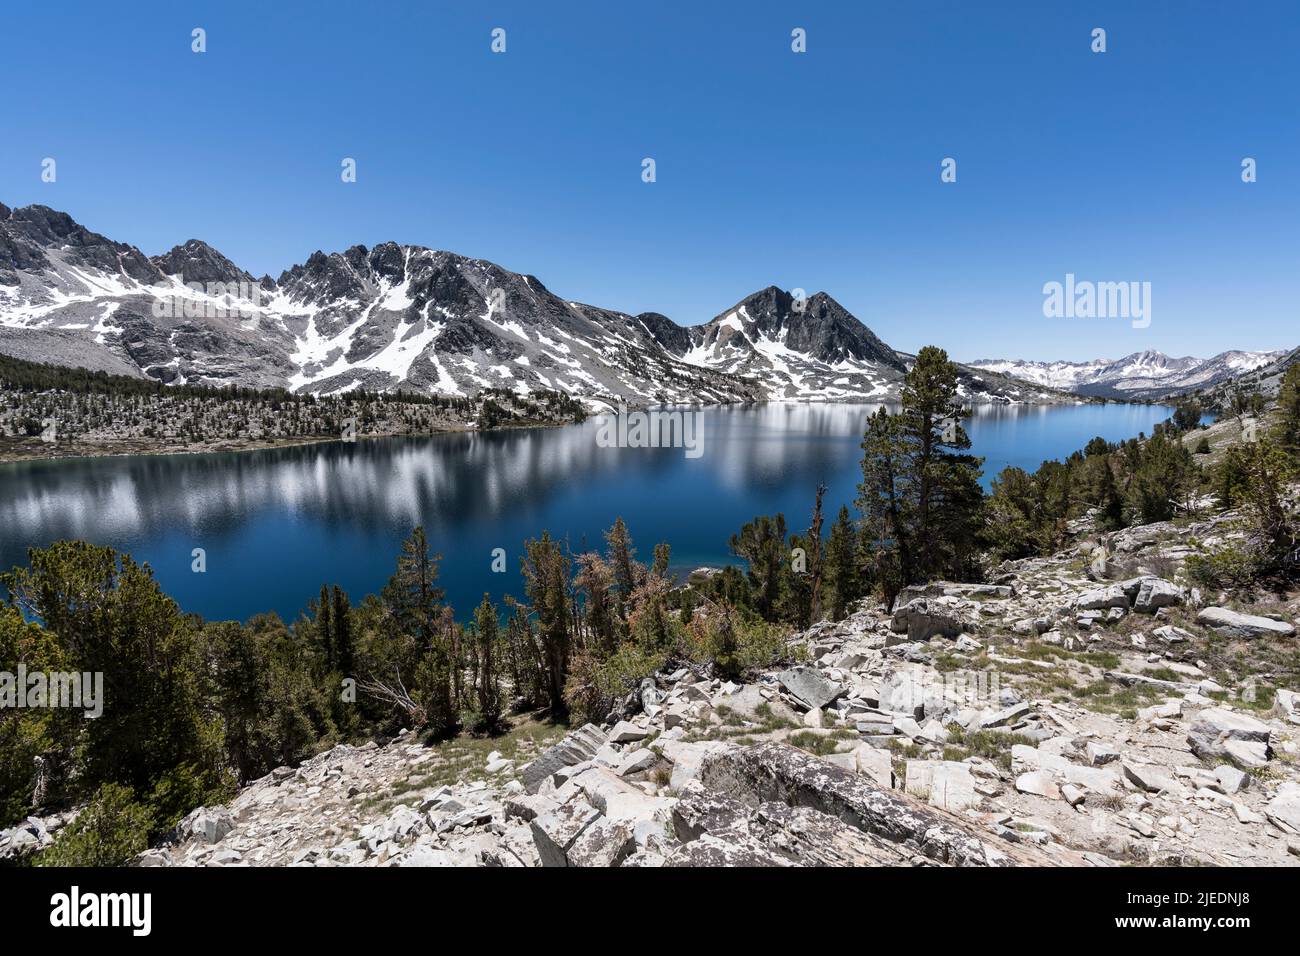 Duck Lake in the wilderness above Mammoth Lakes in the Sierra Nevada Mountains of California. Stock Photo